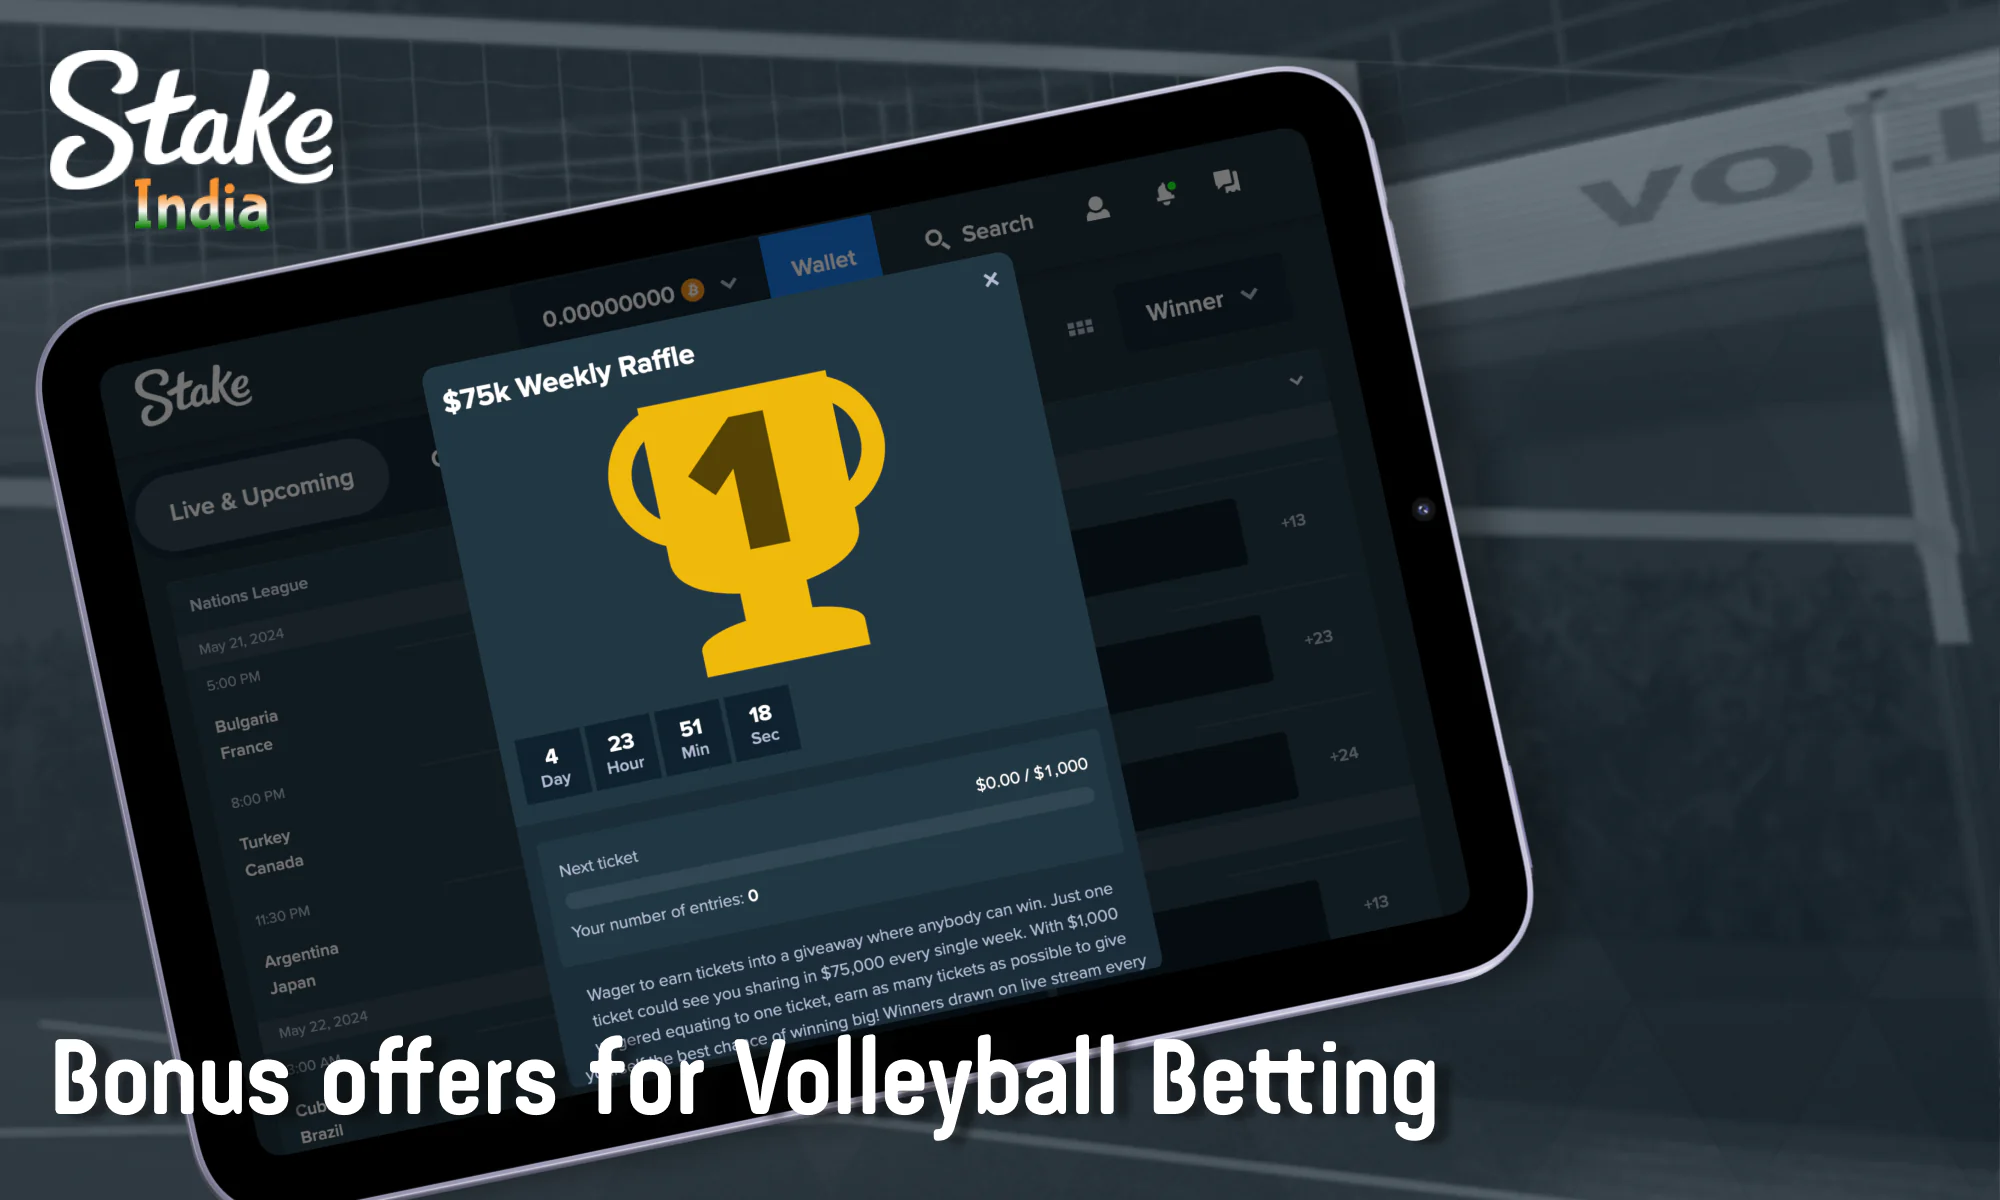 Bonuses for volleyball betting for Indian Stake bettors